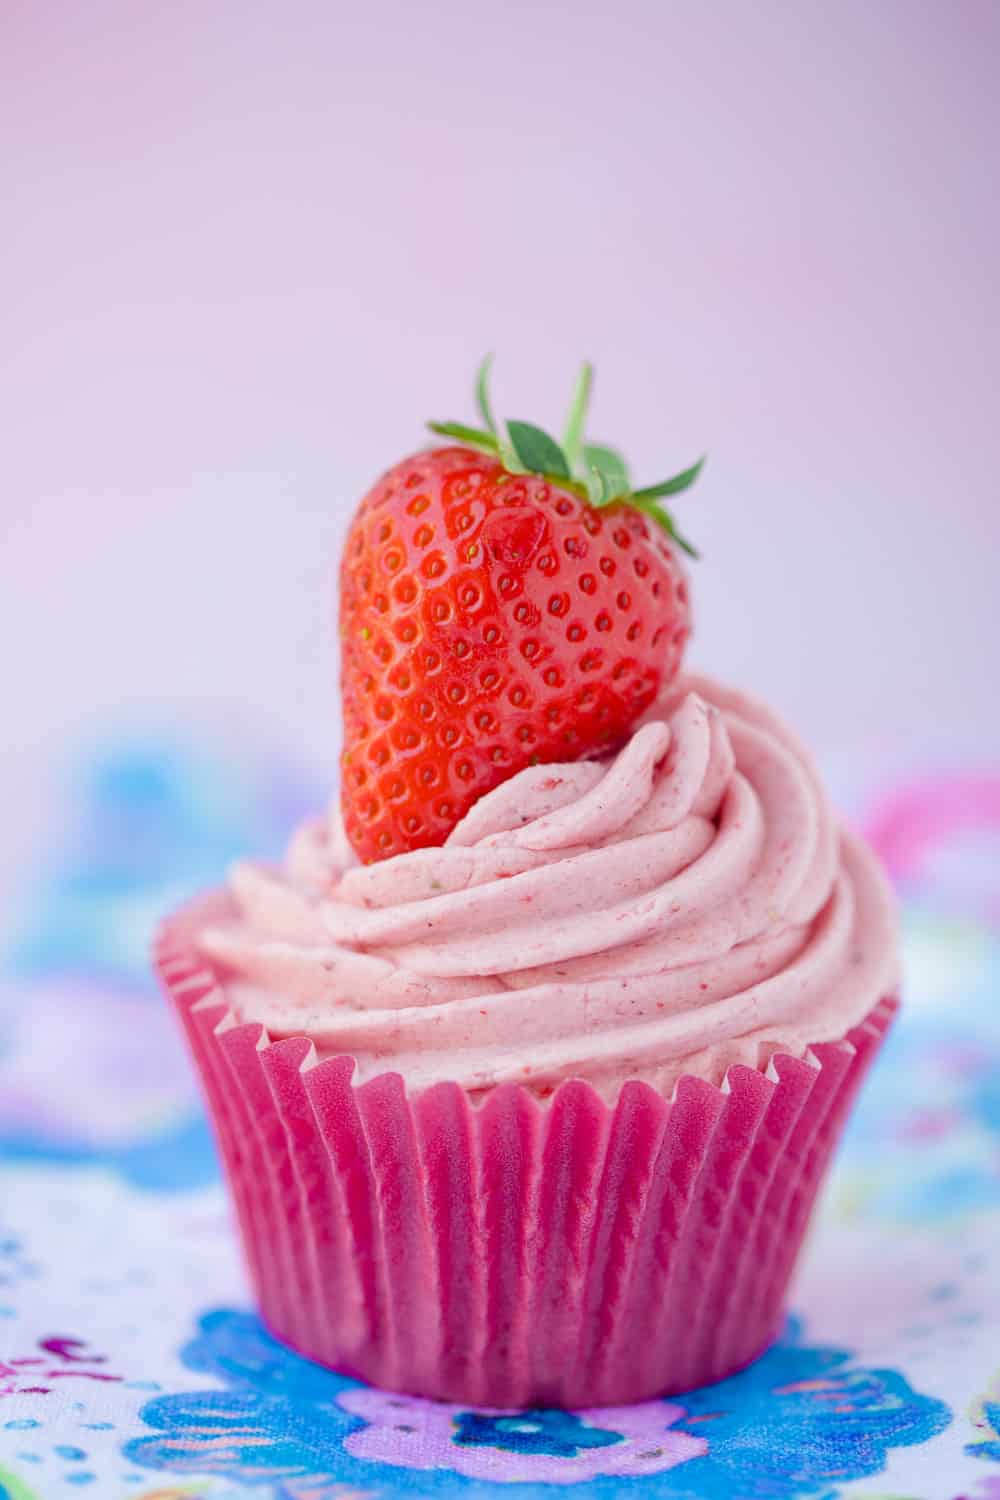 A cupcake topped with a swirl of pink strawberry frosting